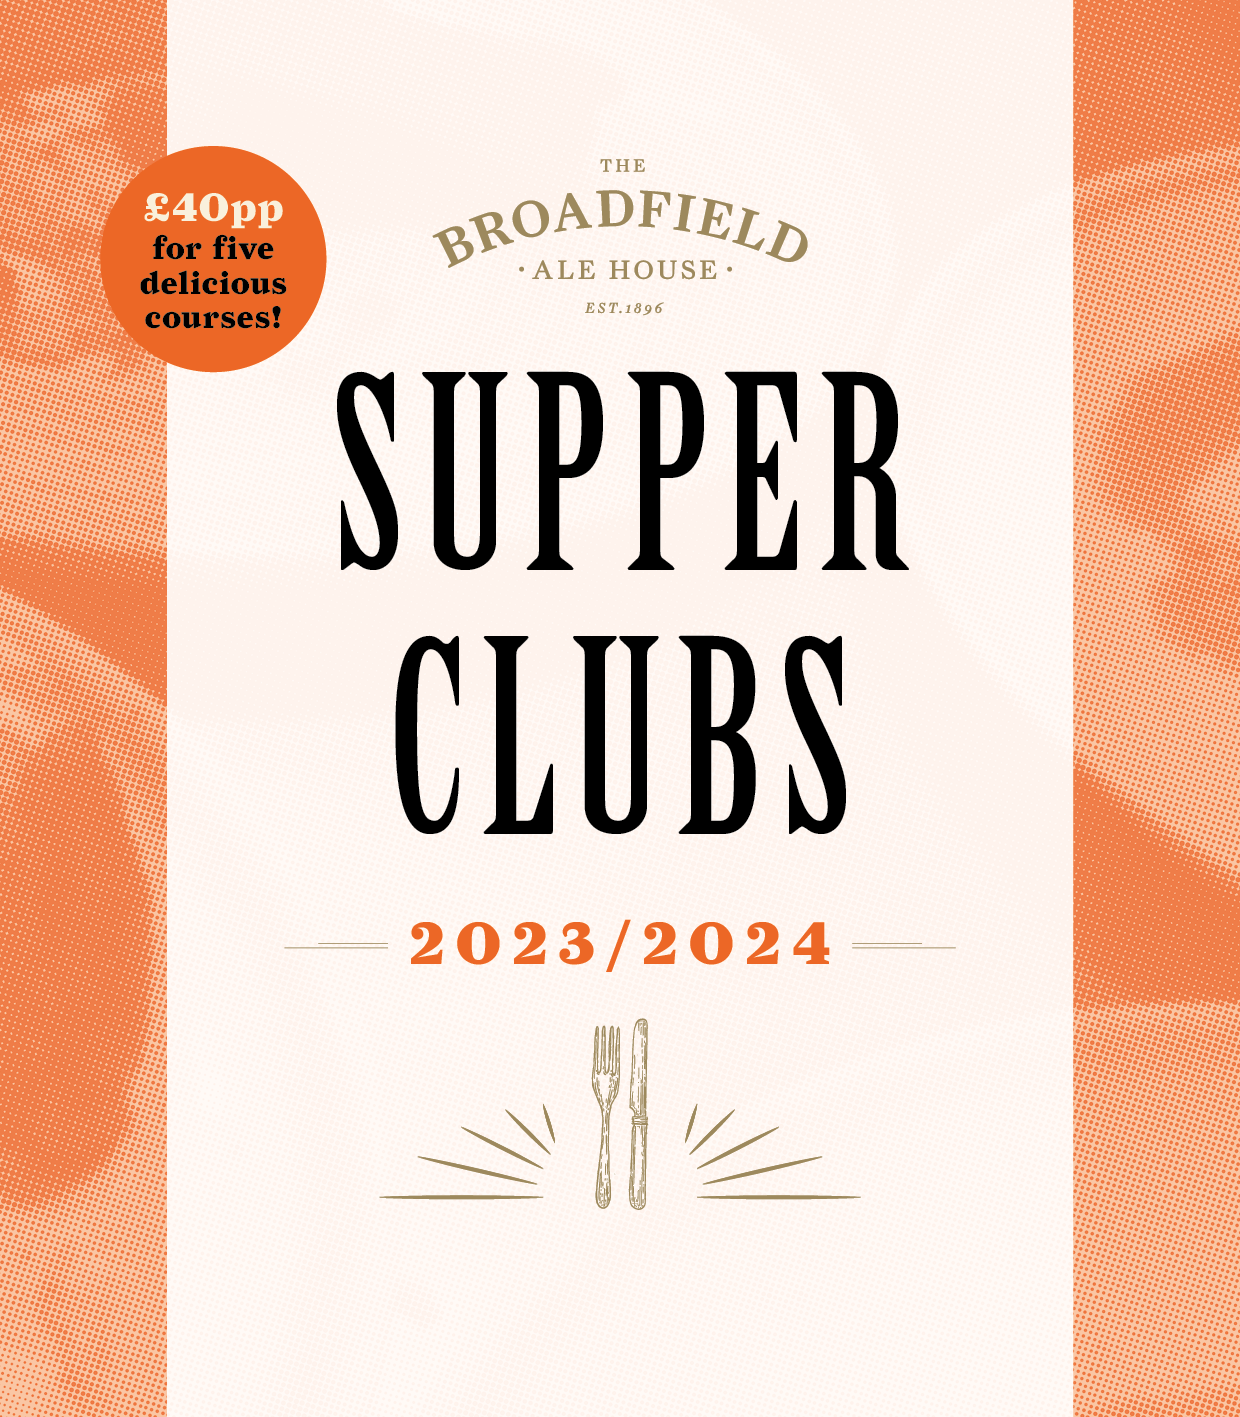 The Broadfield Supper Club 2023/24